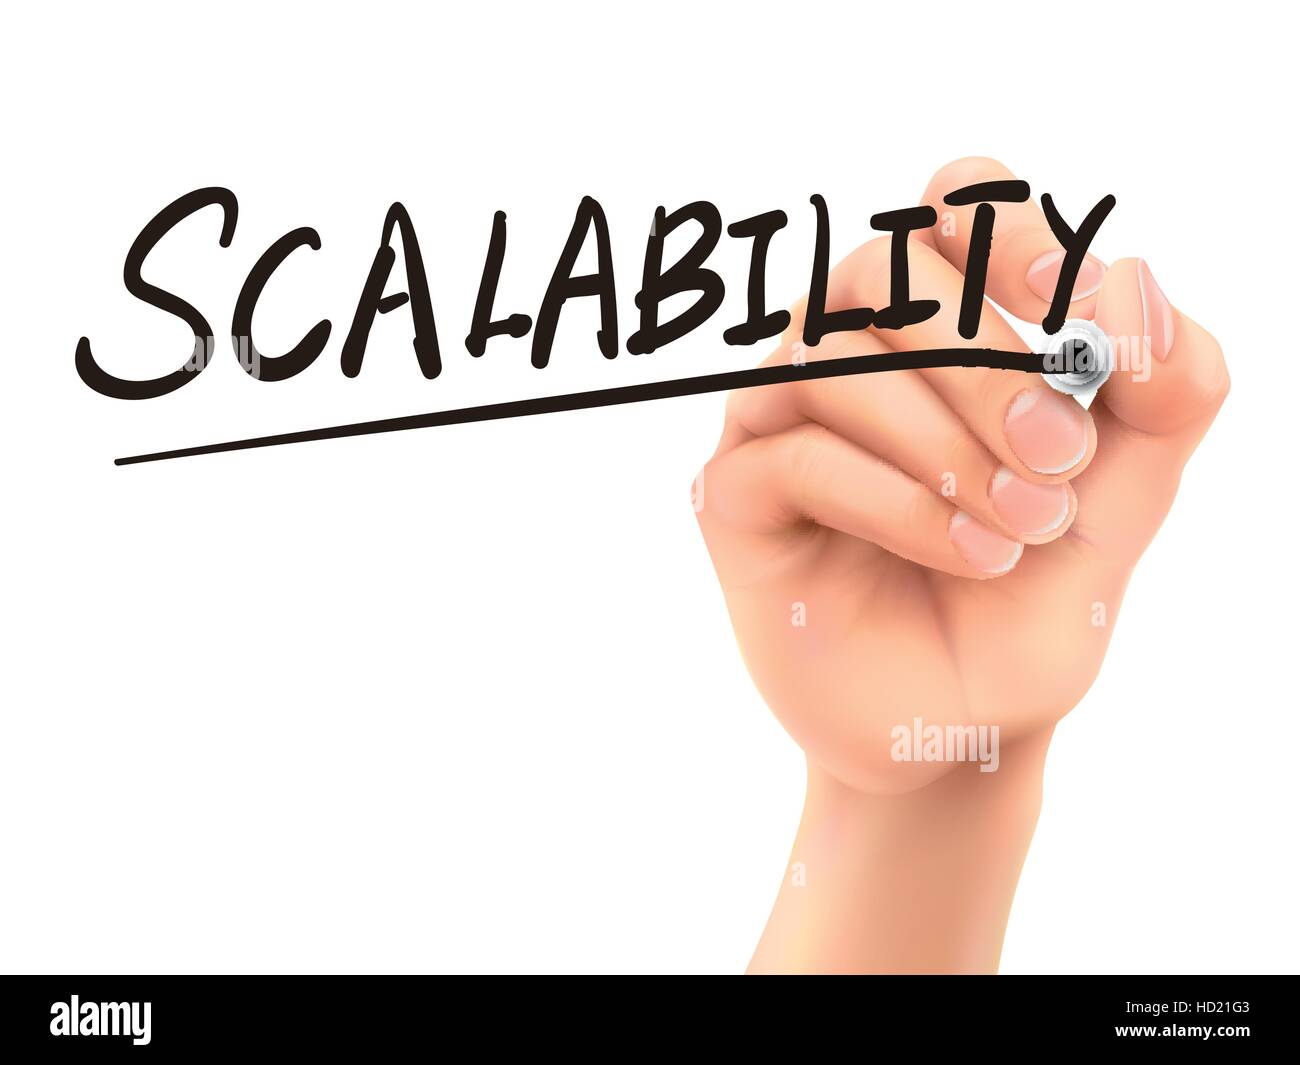 scalability word written by 3d hand over white background Stock Vector